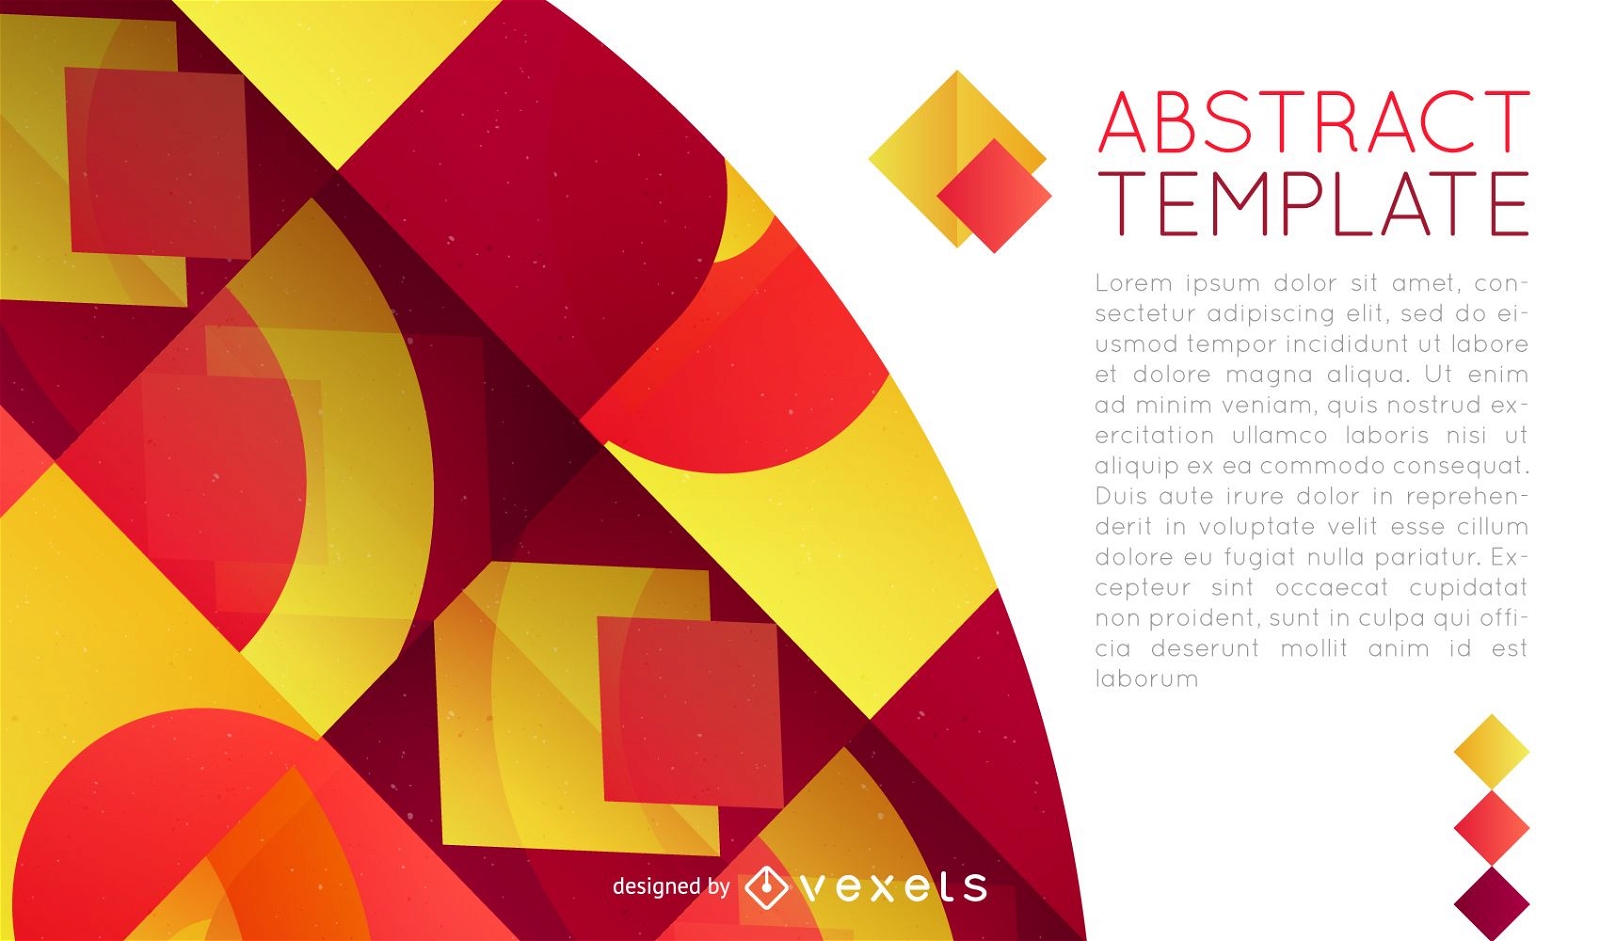 Presentation design with red and yellow geometric shapes